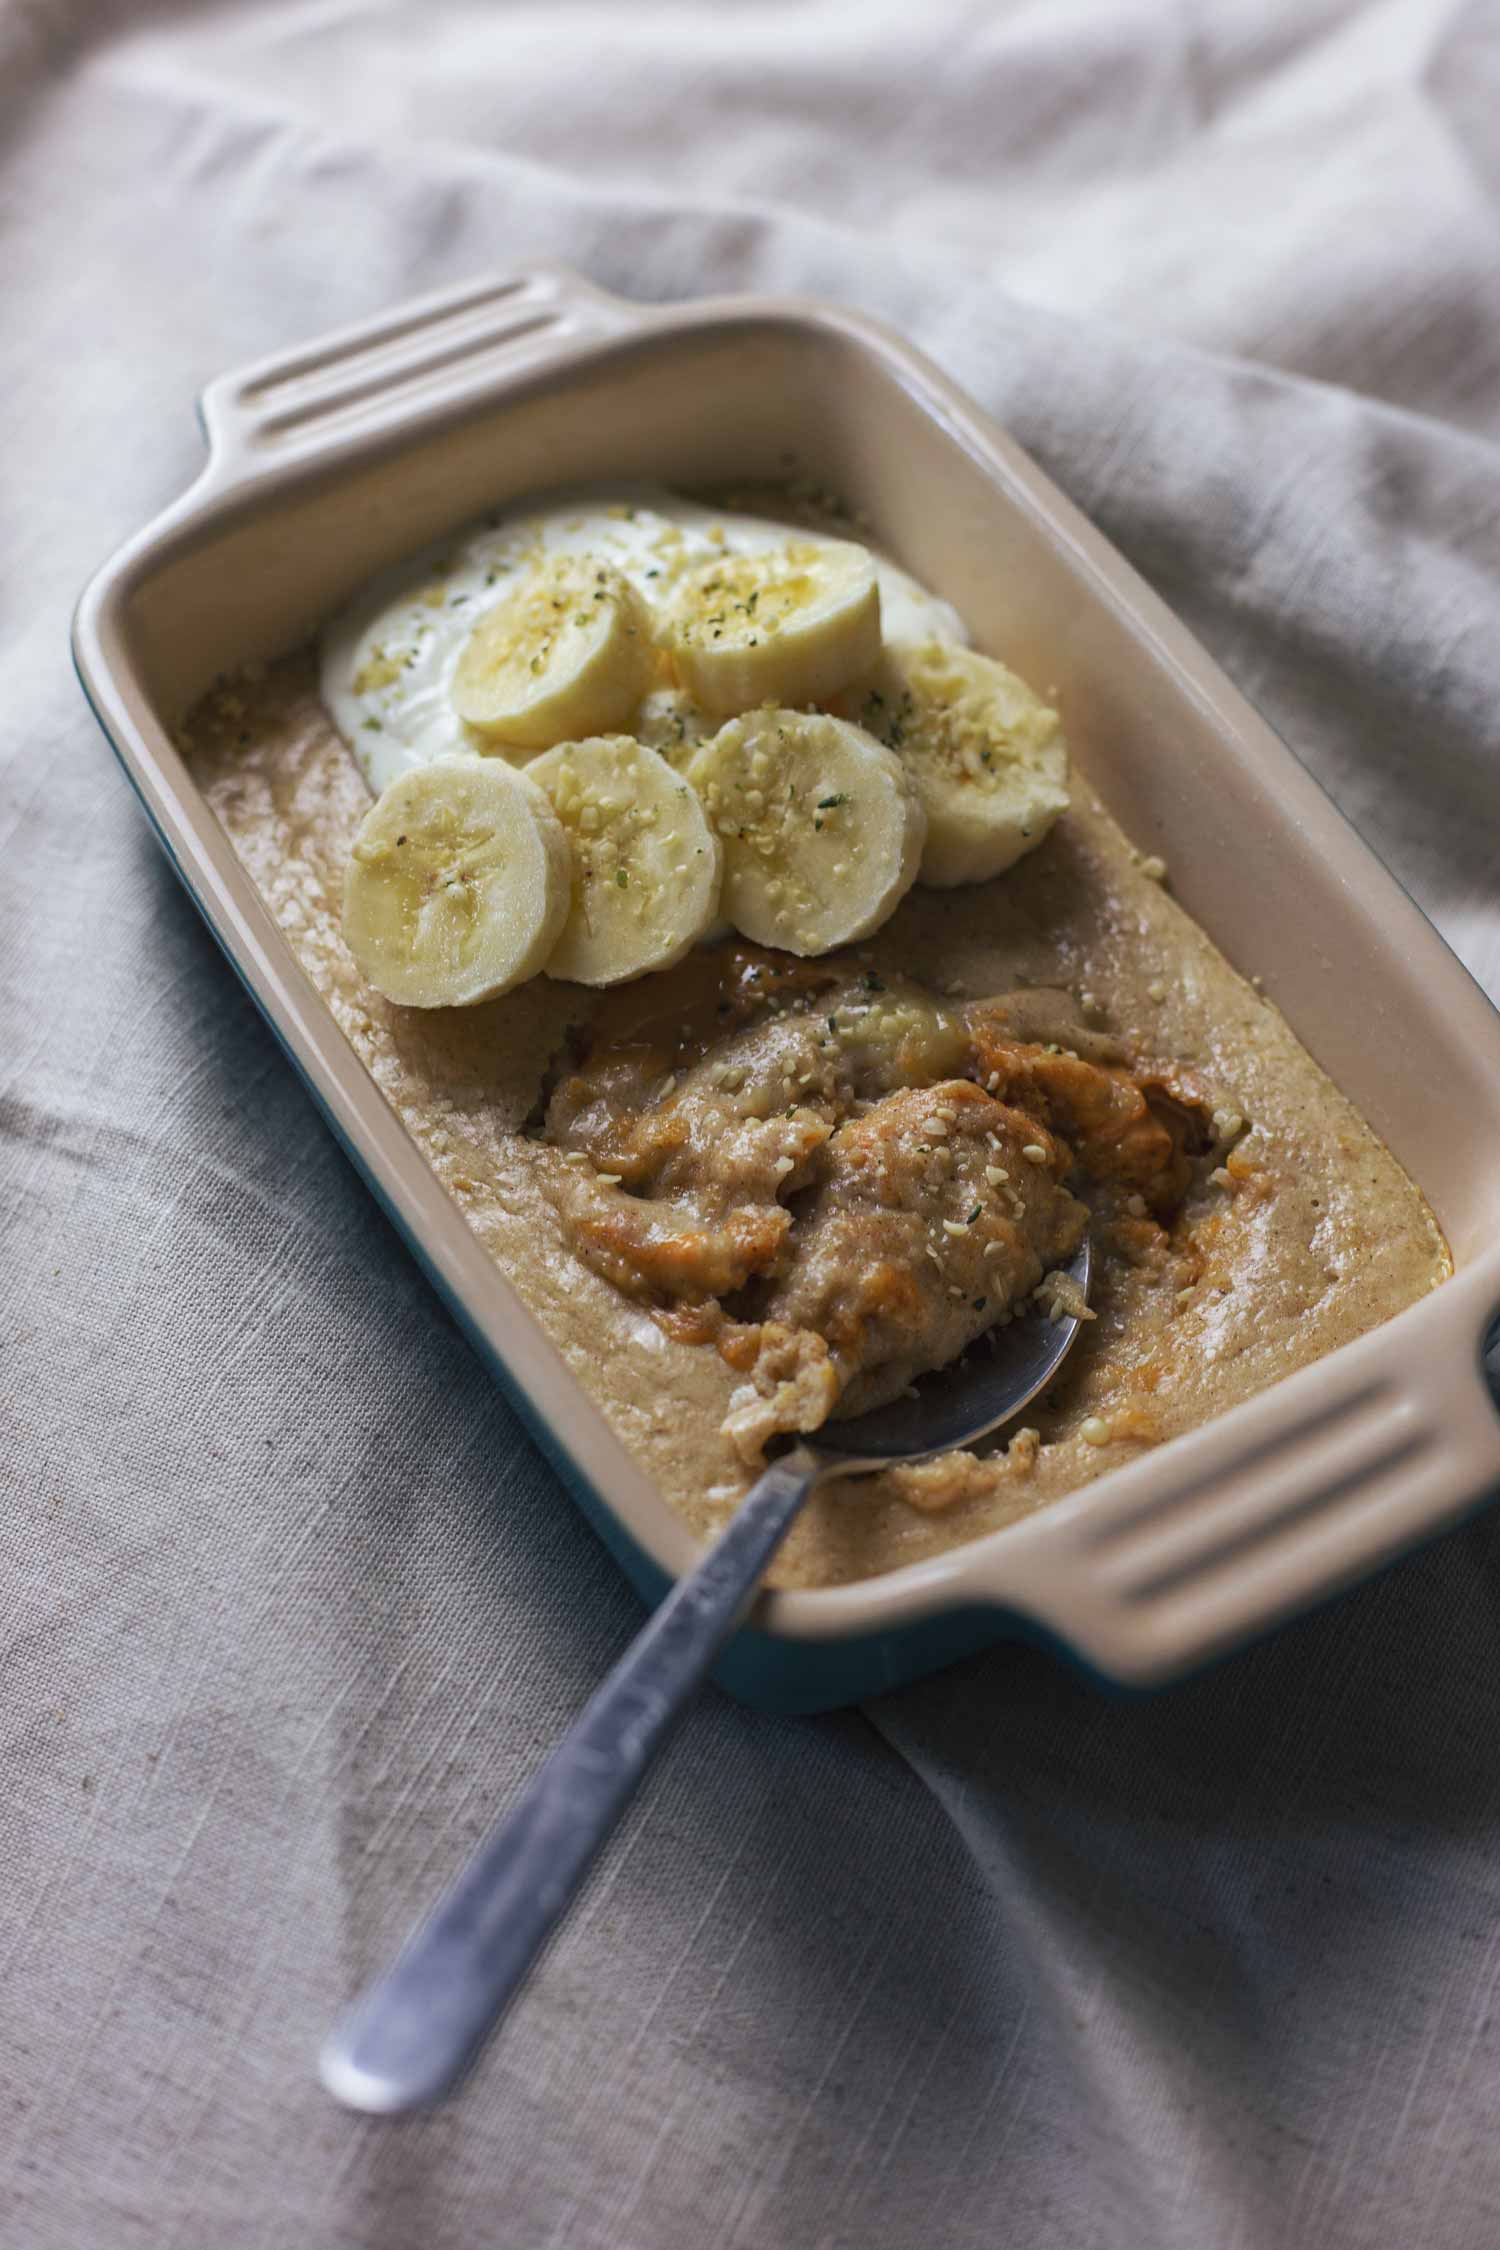 A dish of baked oats with peanut butter, banana, and greek yoghurt